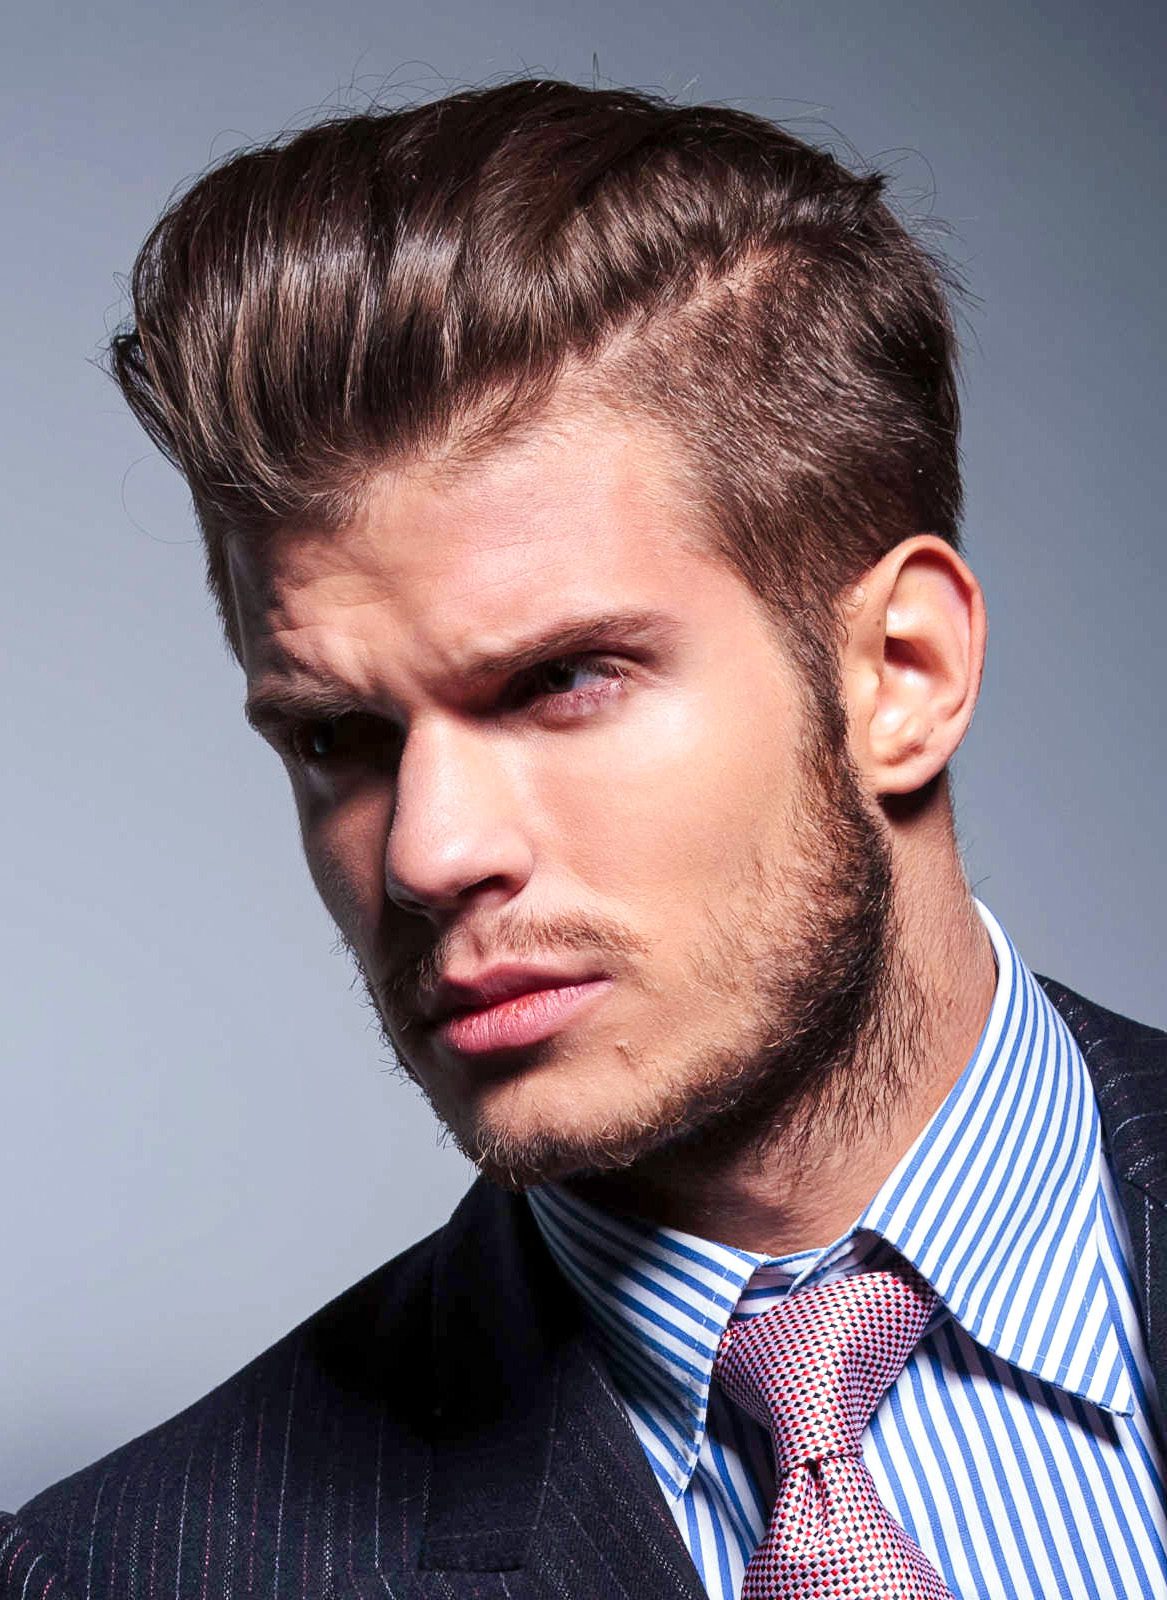 Top 4+ Professional & Business Hairstyles for Men